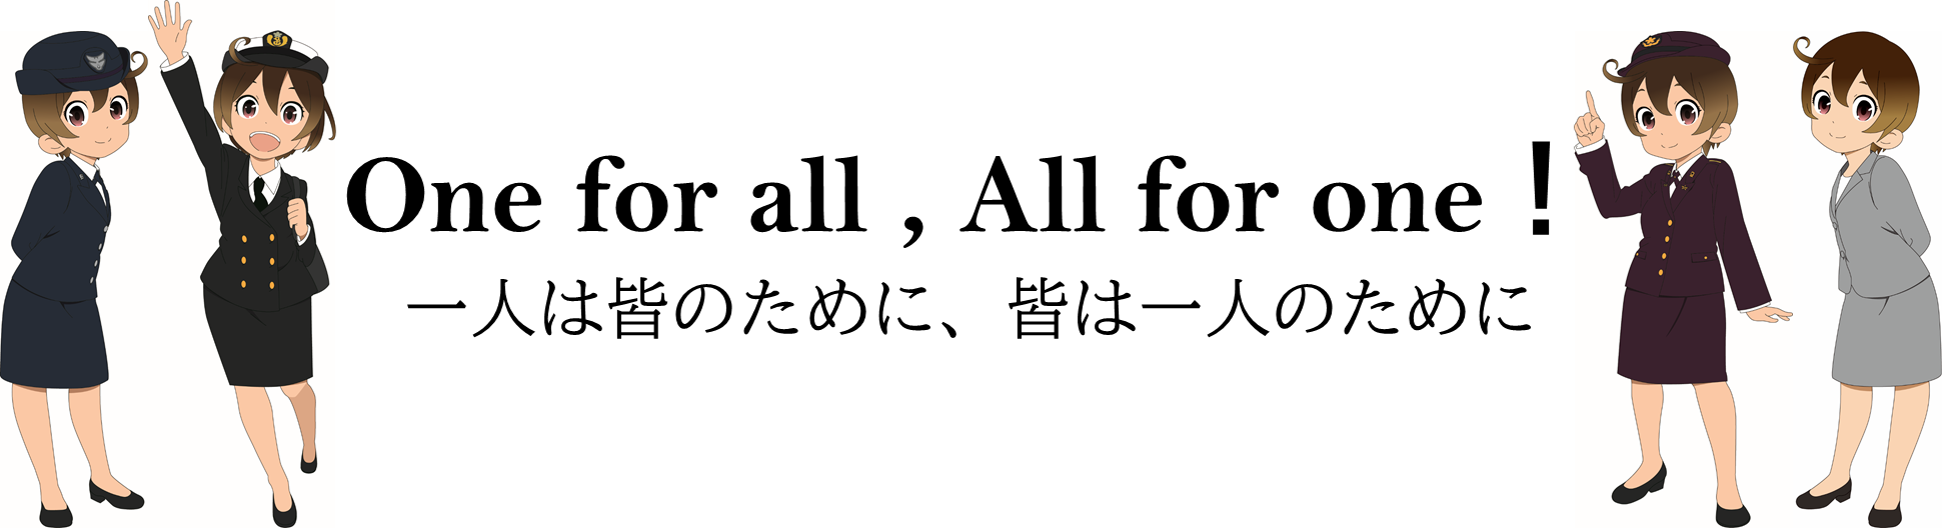 One for all, All for one!　一人は皆のために、皆は一人のために